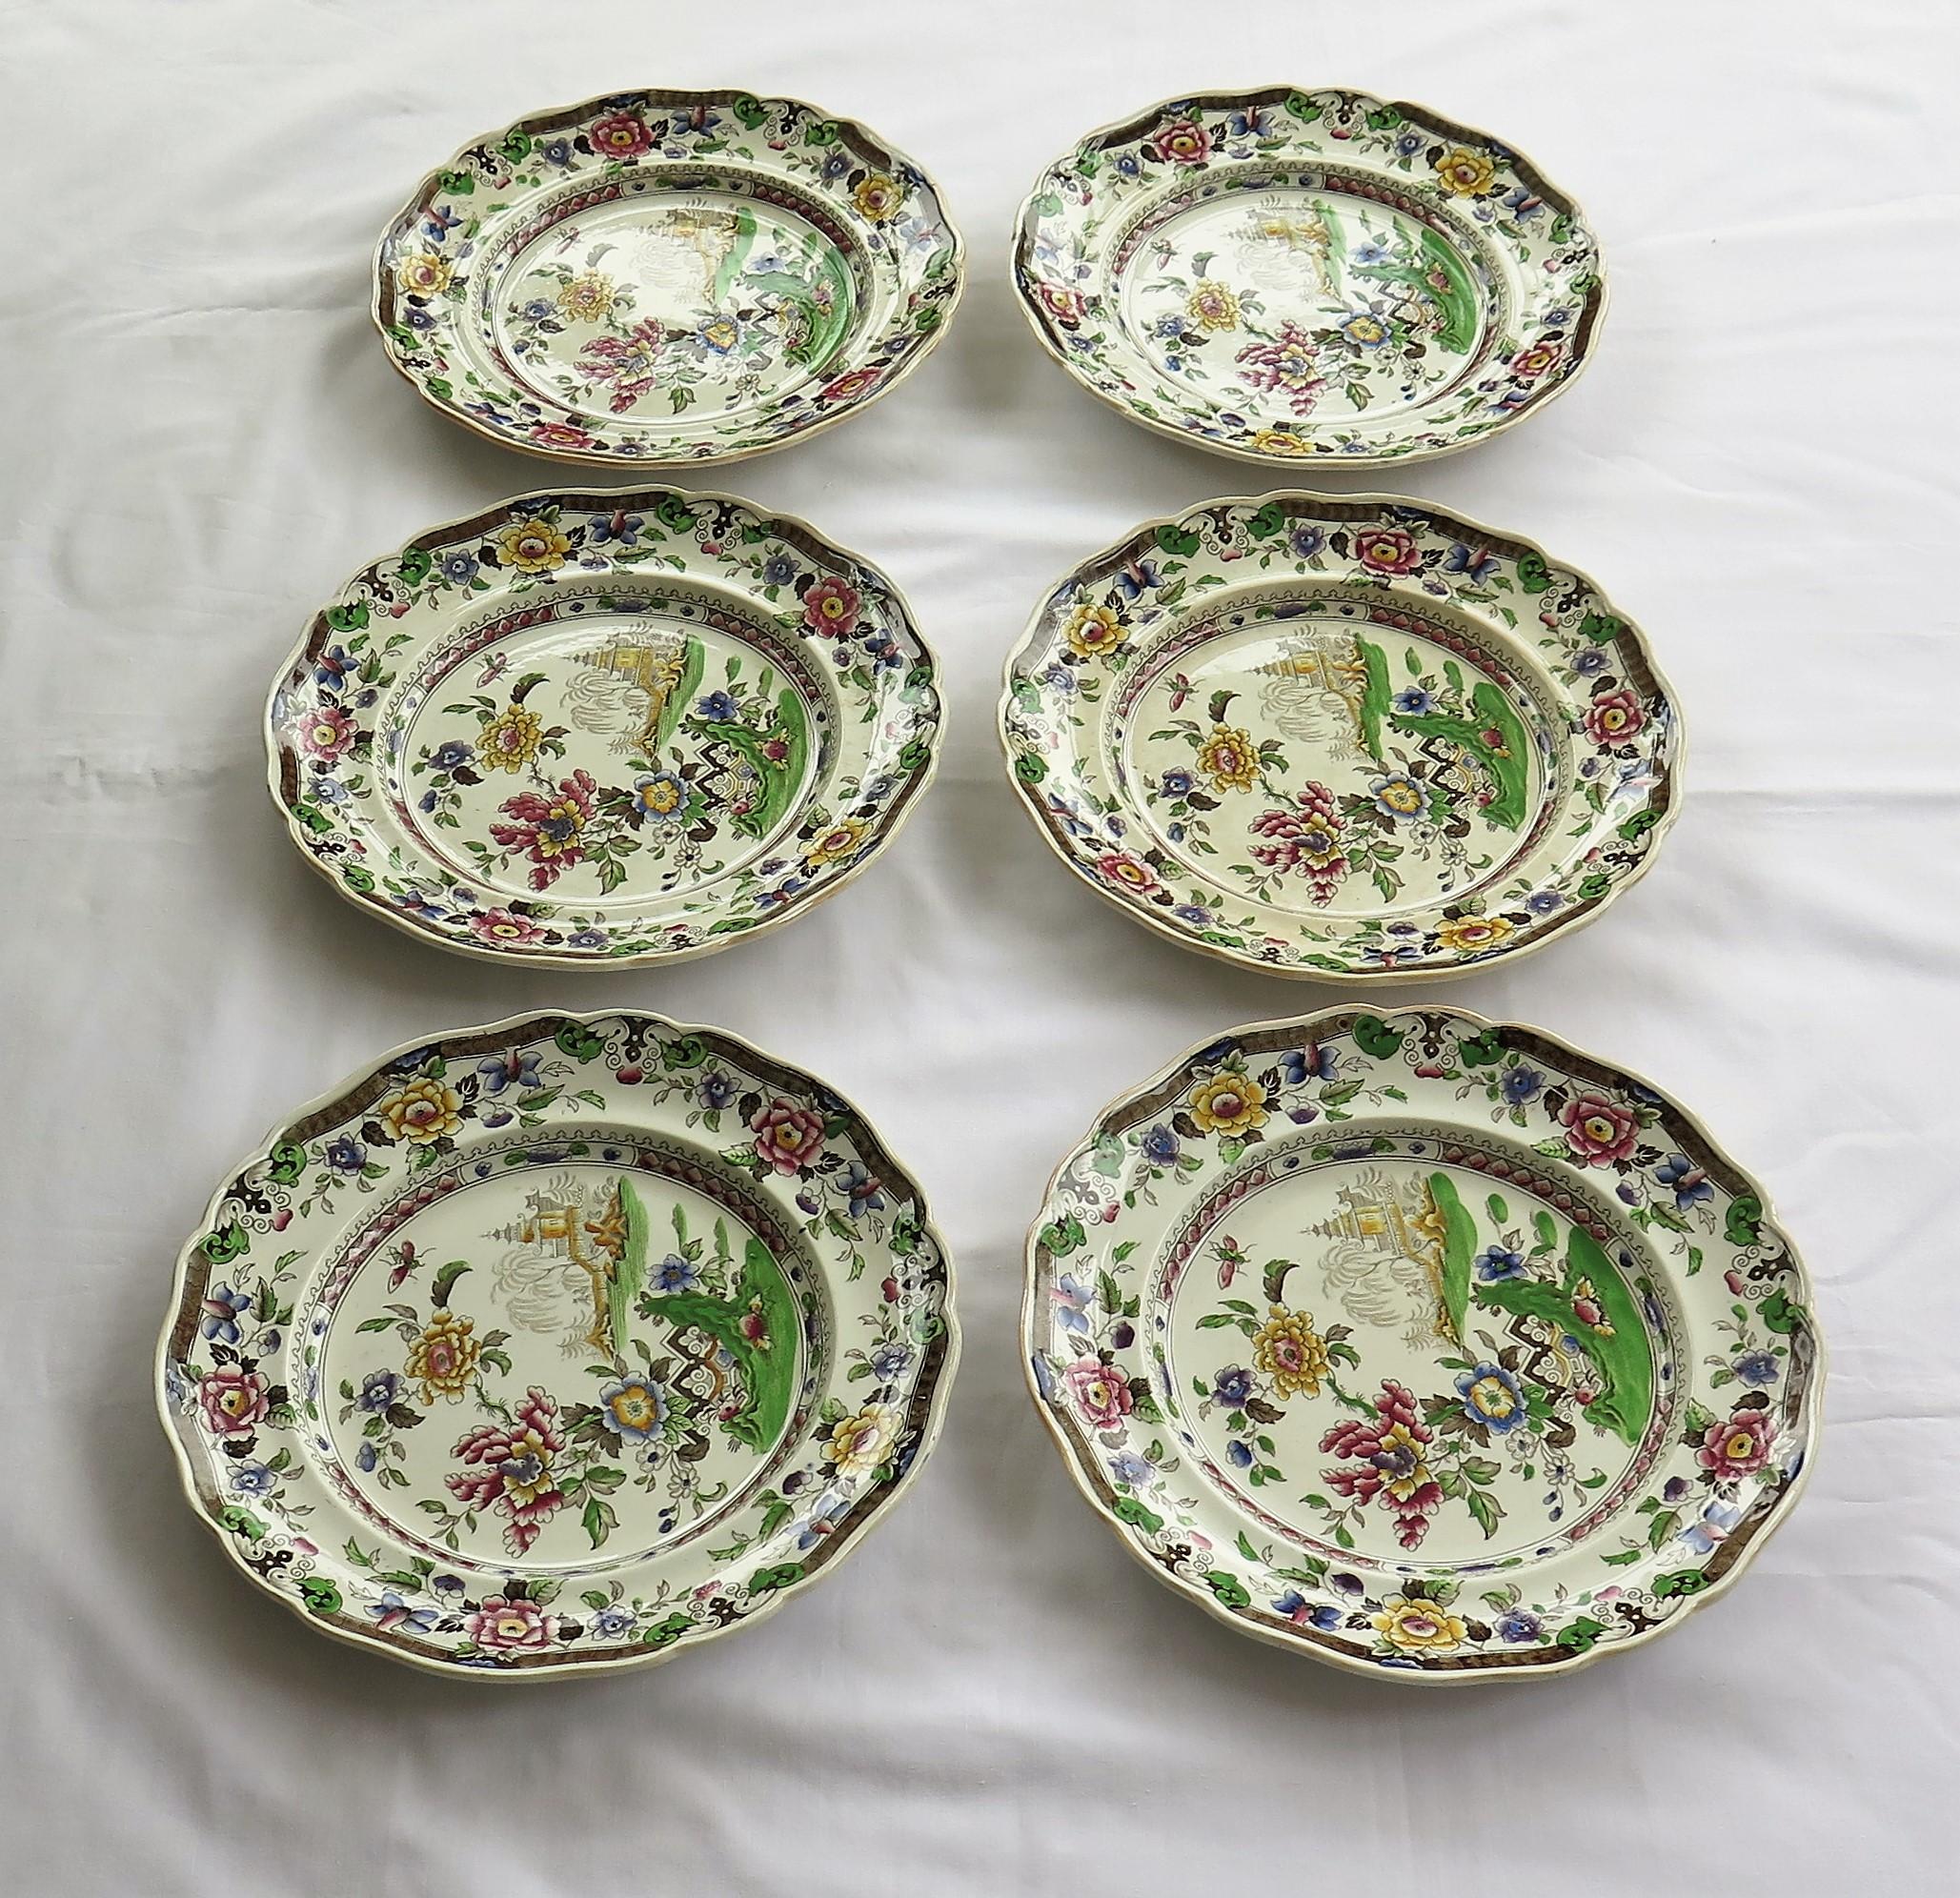 Hand-Painted SIX Large Pottery Dinner Plates by Zachariah Boyle Chinese Flora Ptn, circa 1825